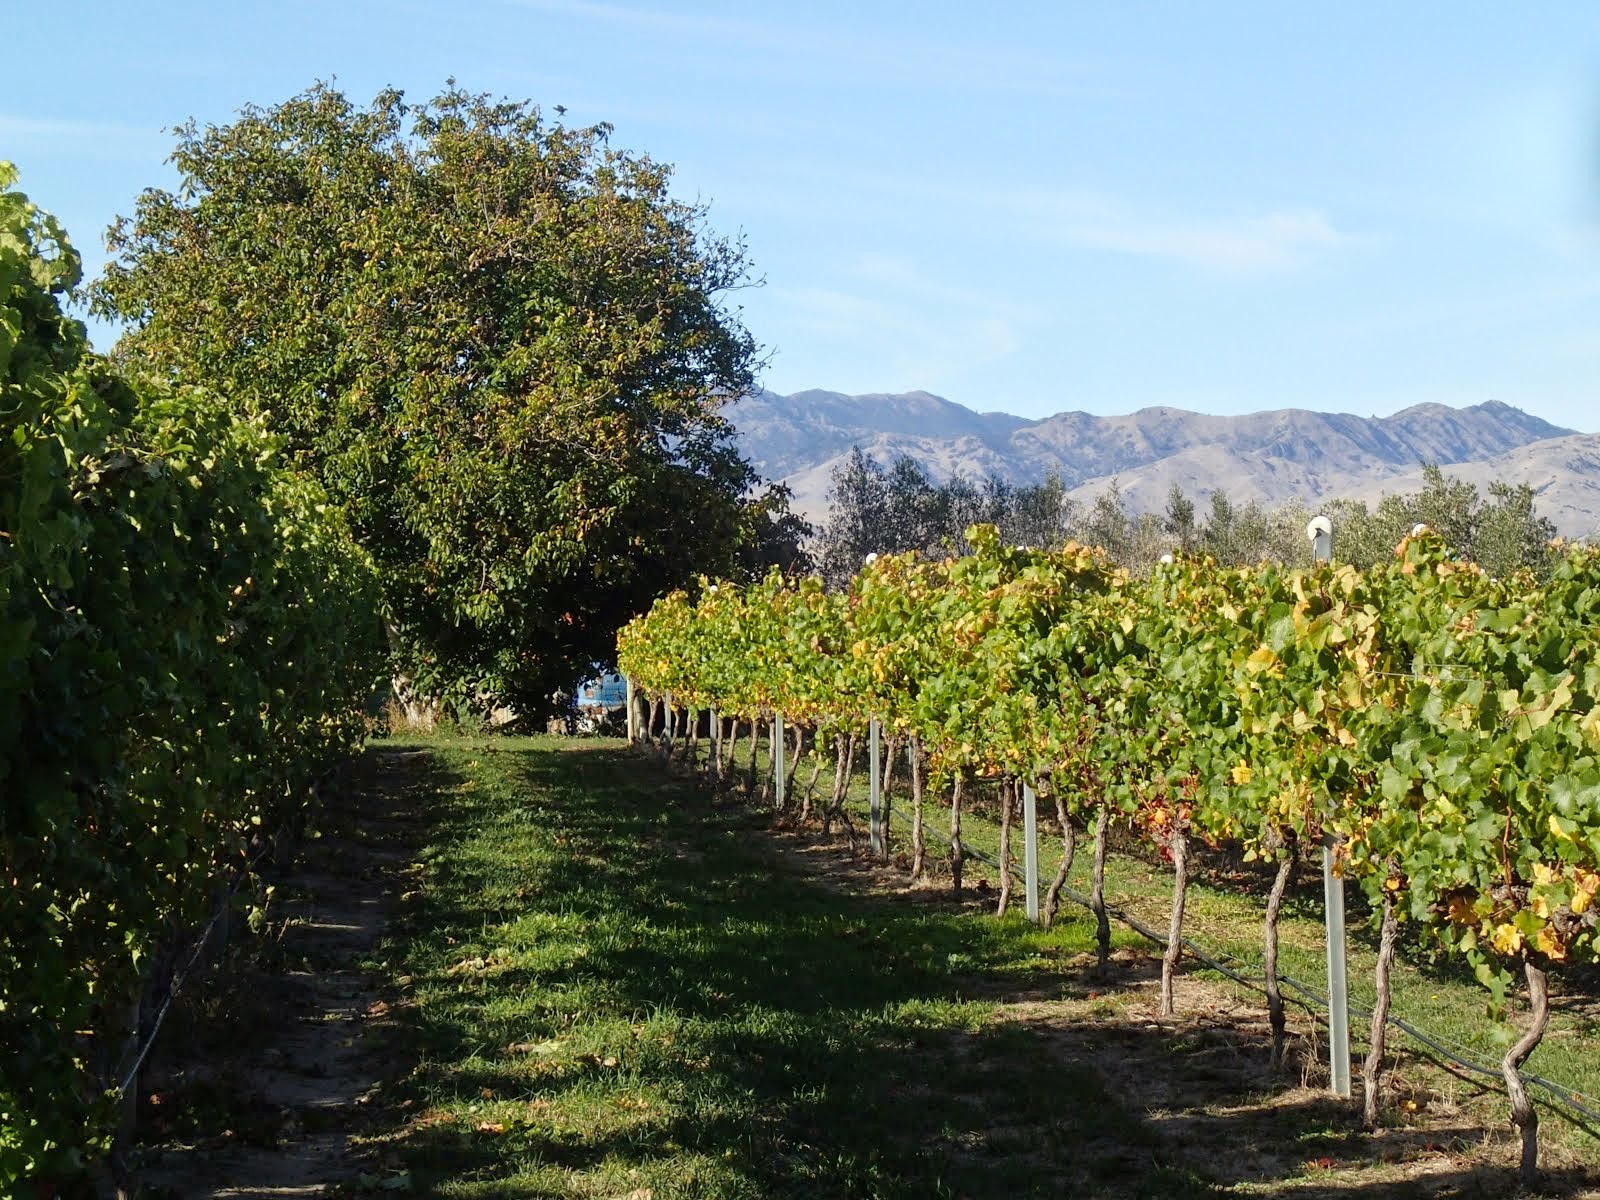 Looking down a row of vines to one of the walnut trees and the dry Wairau Hills